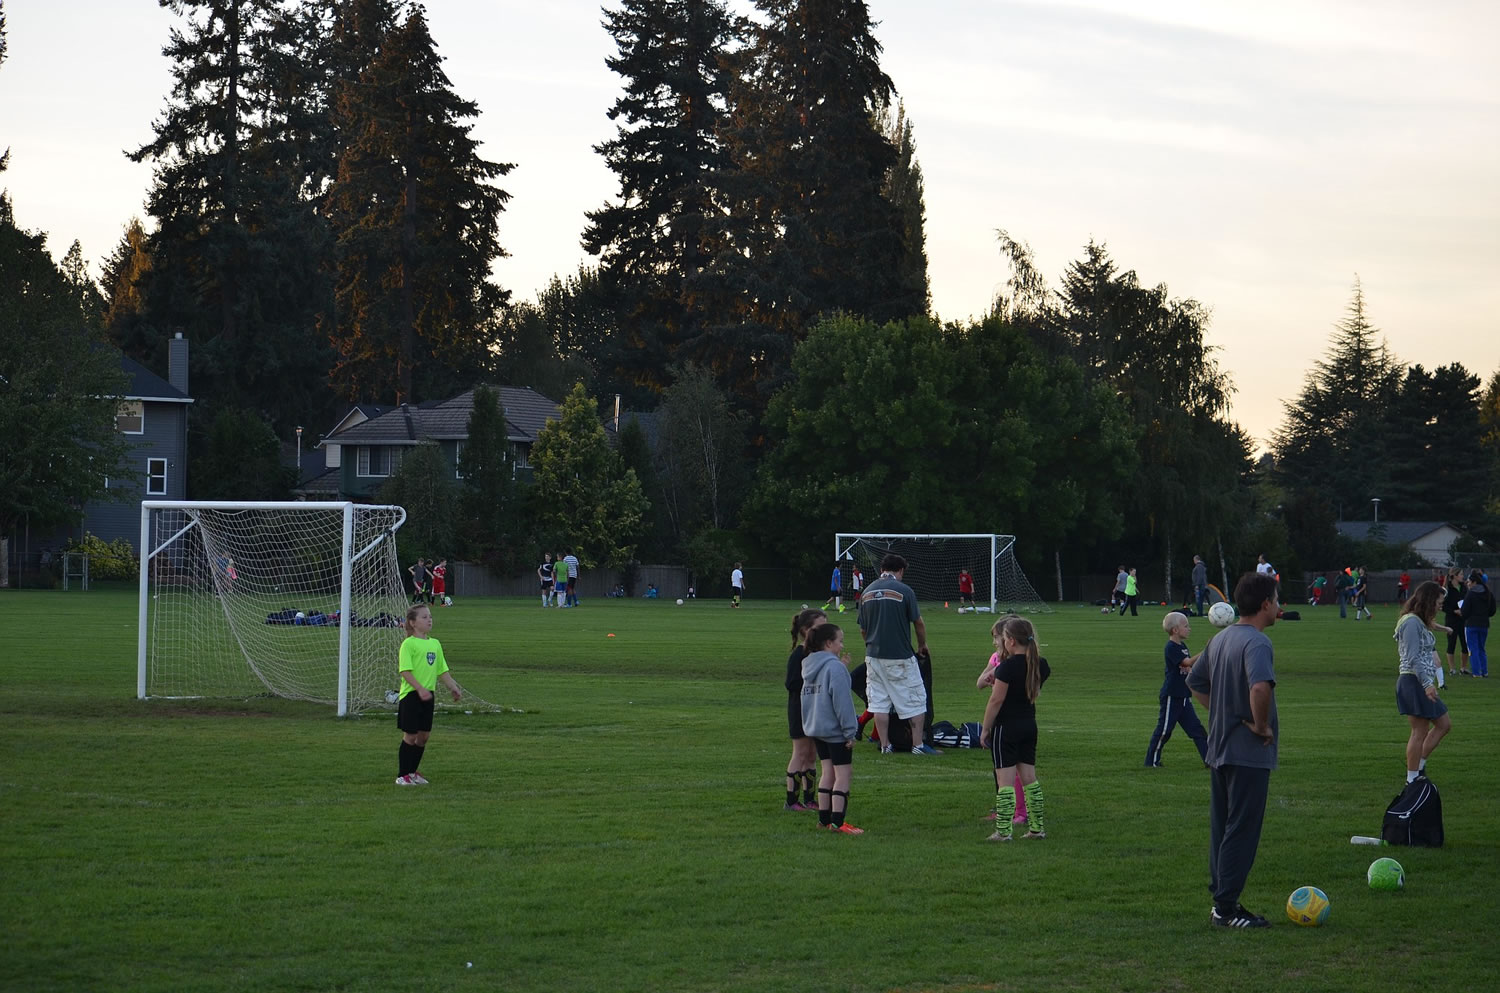 On any evening, dozens of soccer and football players are found at Jason Lee Middle School and other fields around Clark County.